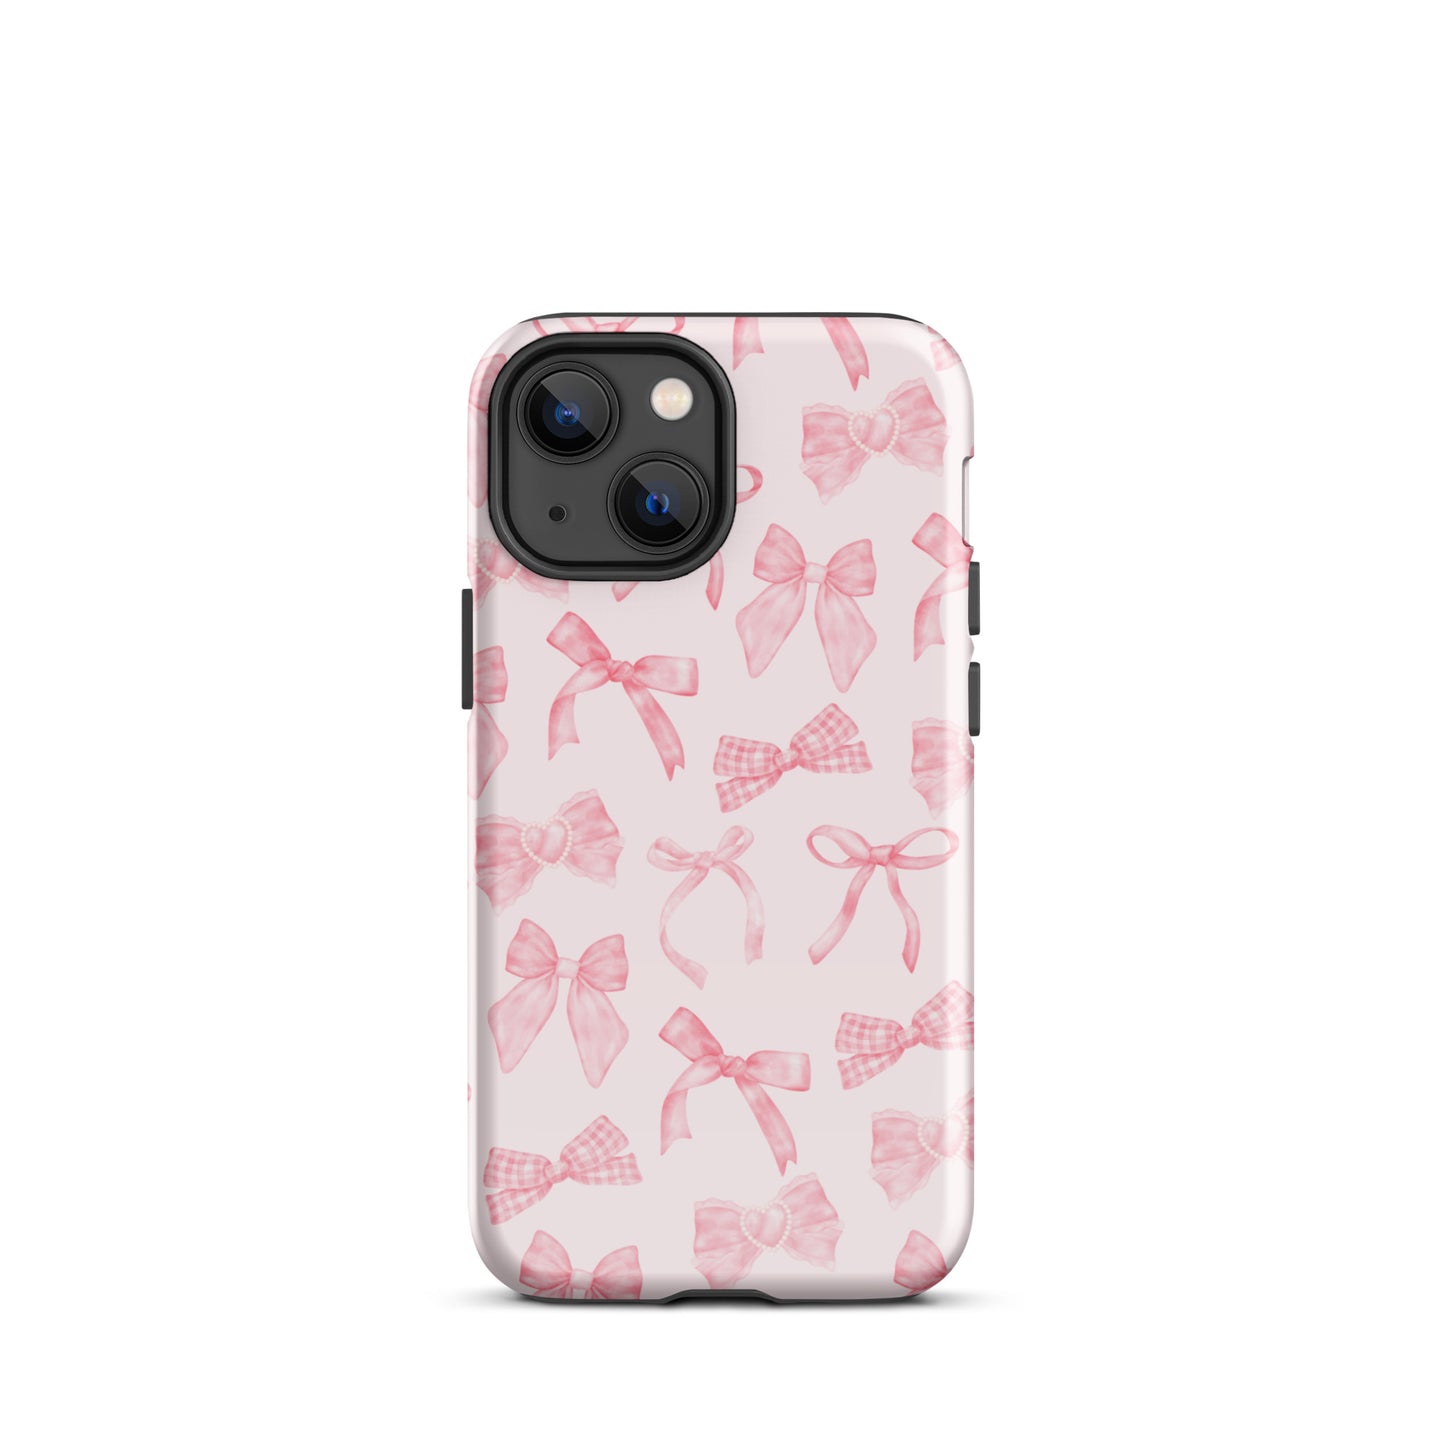 Bow Delight iPhone Case